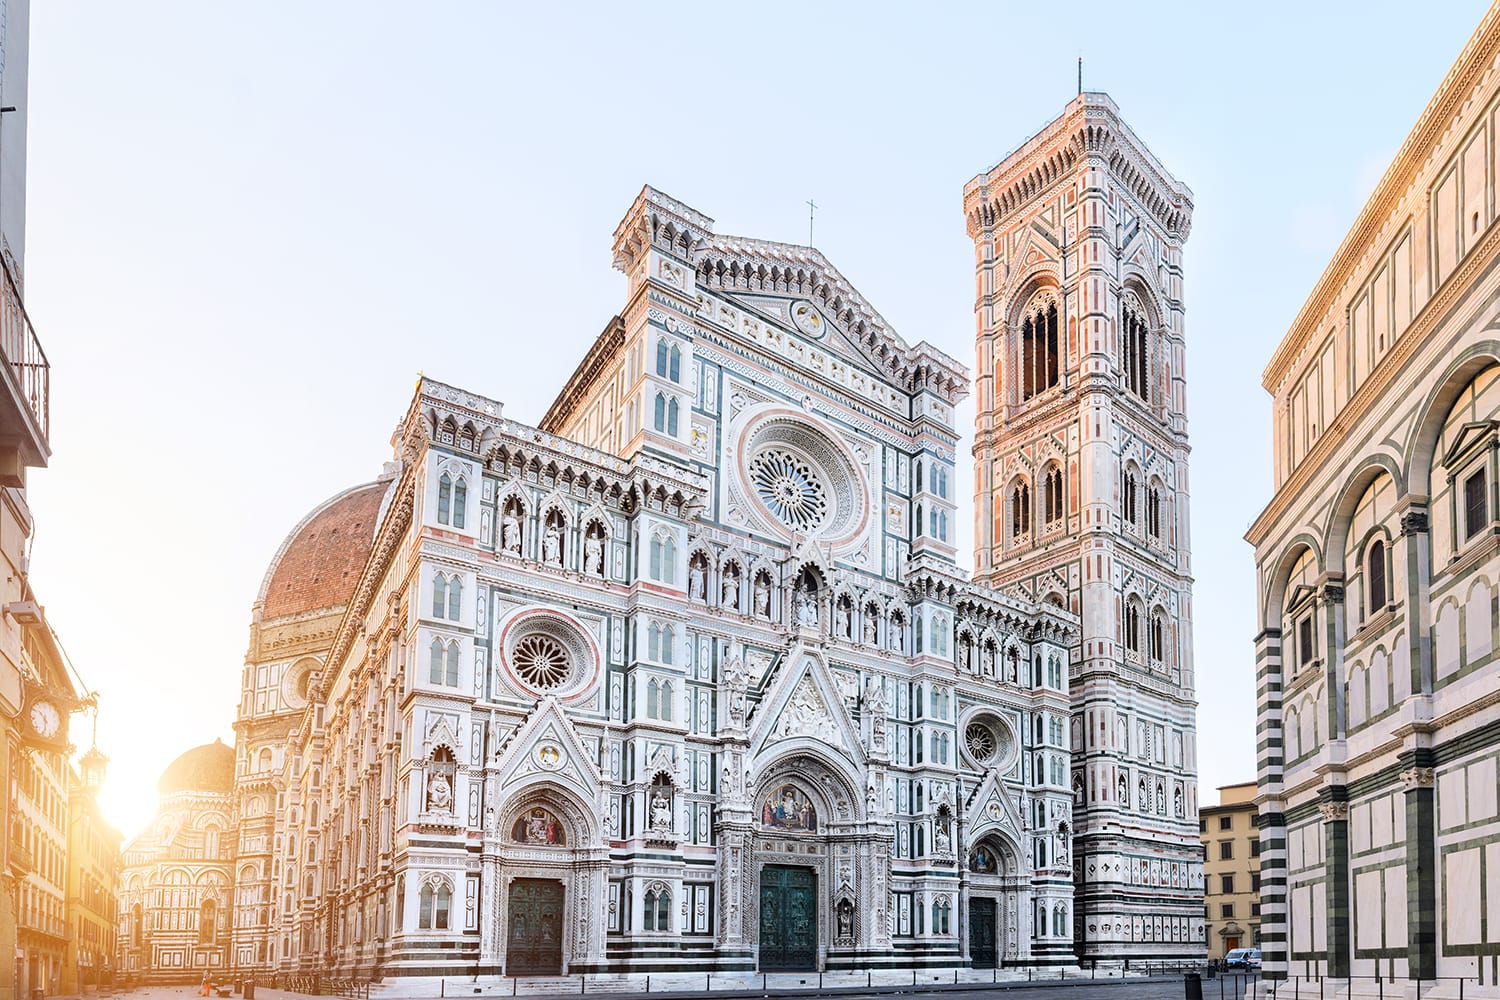 Sunrise view of Cathedral Santa Maria del Fiore in Florence, Italy